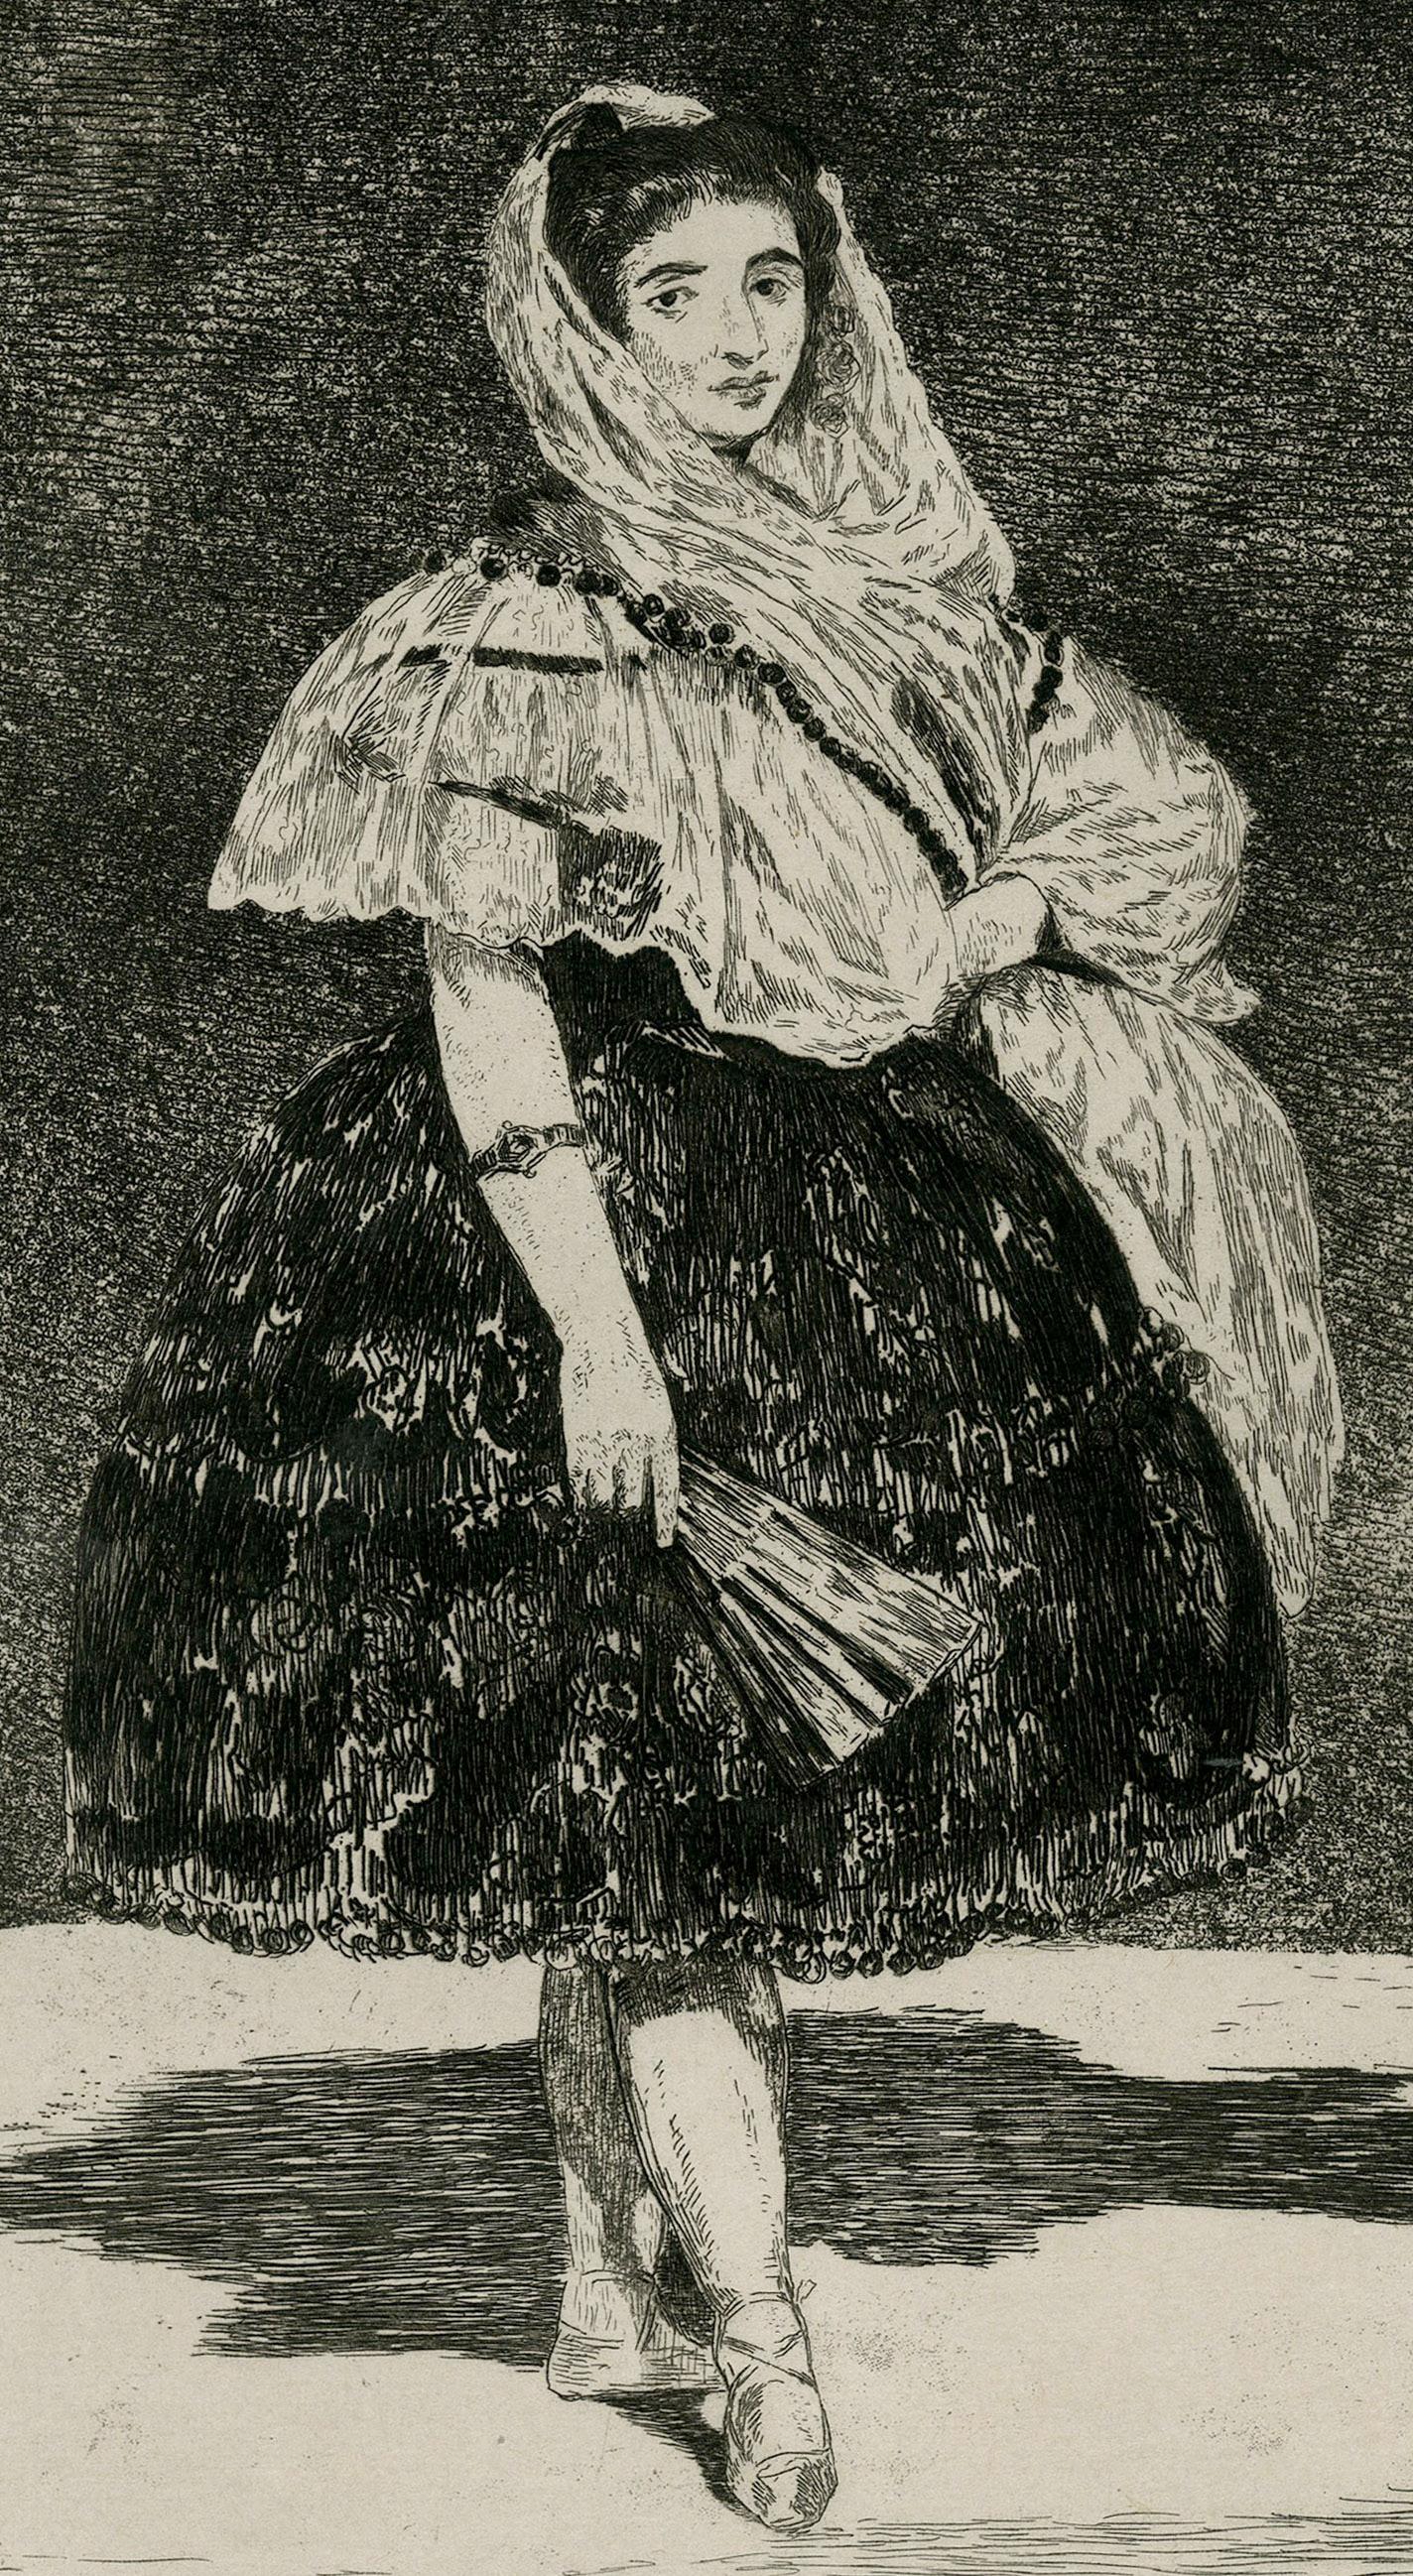 Lola De Valence
Etching, 1862
Signed in the plate lower left: “Ed Manet”
Printed on chine collee paper, without watermark
From the first edition, published by Cadart and Luquet, Paris, before the removal of  the inscription     “ Ed. Manet